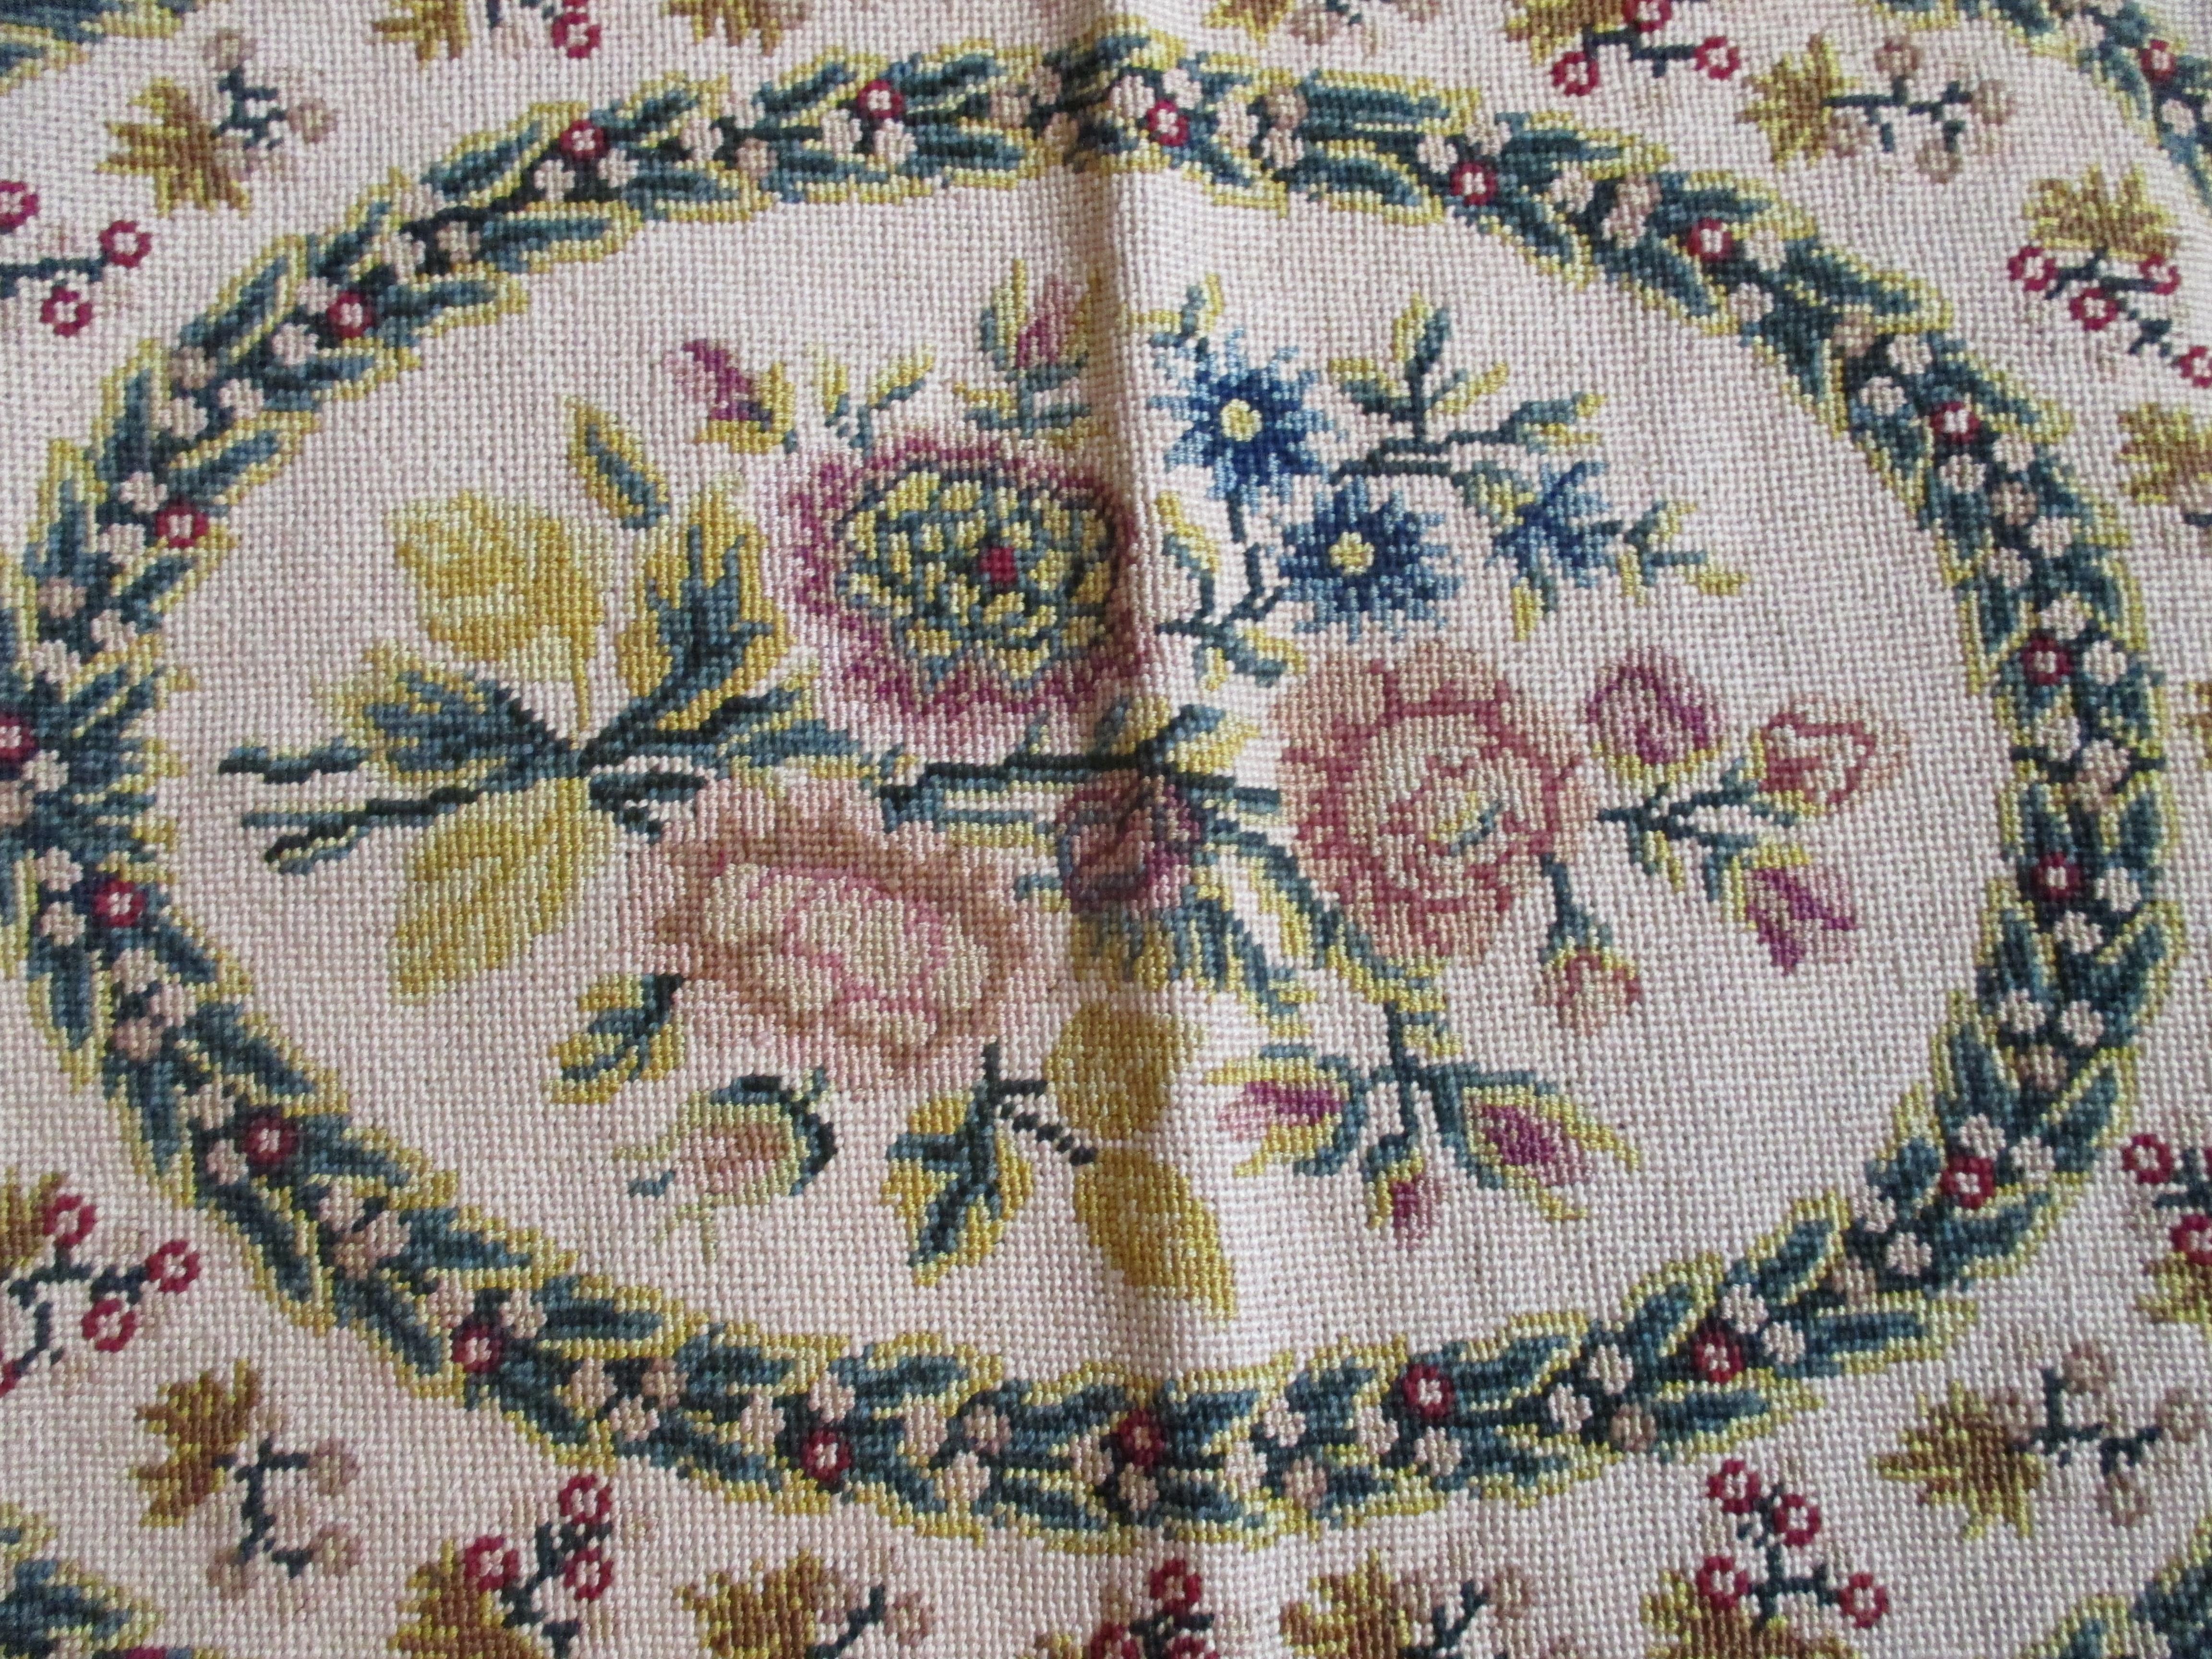 Antique oval seat cover with roses at the center
In shades of yellow, red and blue
Numbered: 35104/16205
Size: 17